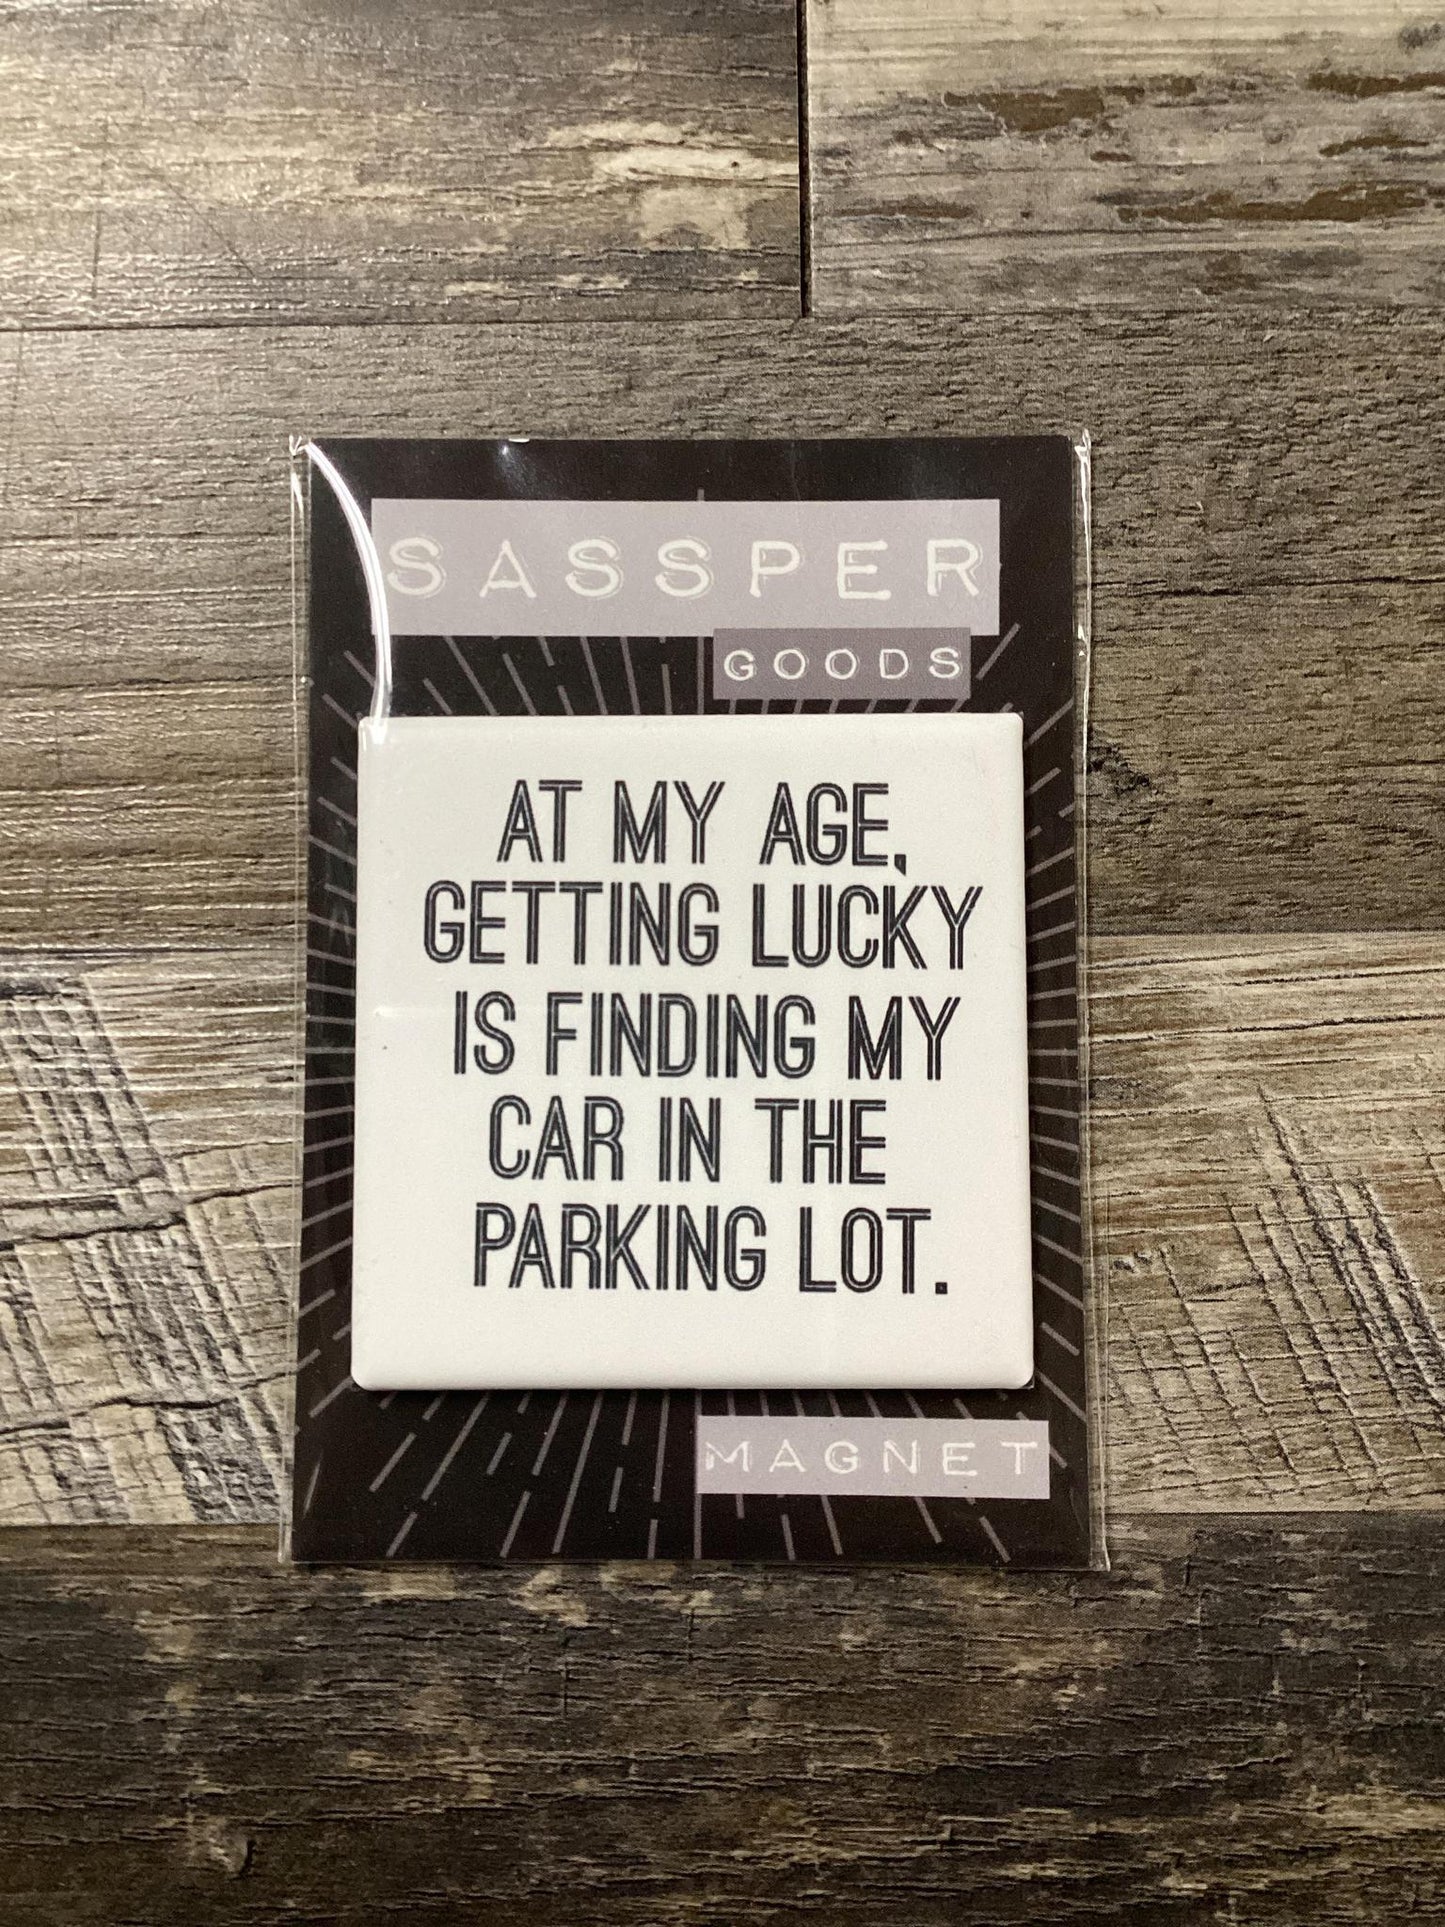 "At My Age, Getting Lucky Is..." Magnet - Sassper Goods